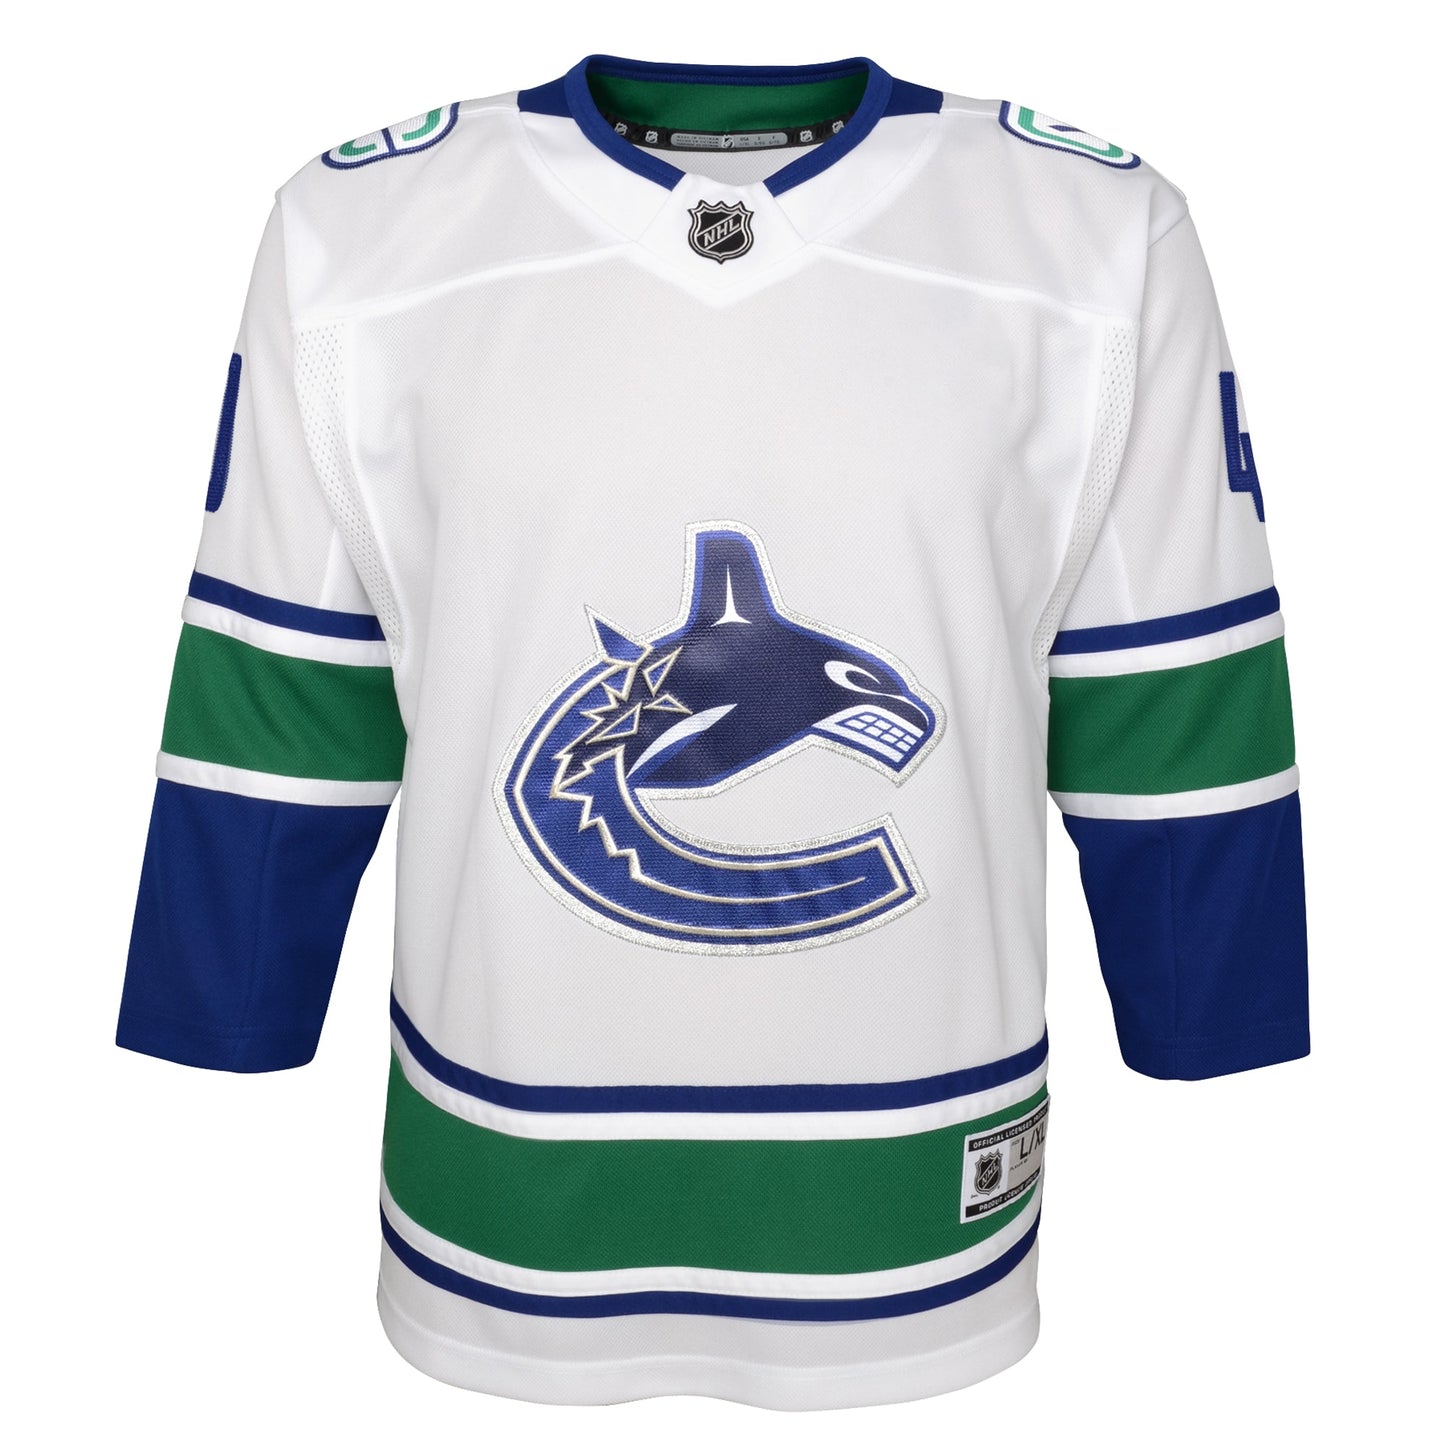 Elias Pettersson Vancouver Canucks Youth 2019/20 Away Premier Player Jersey - White